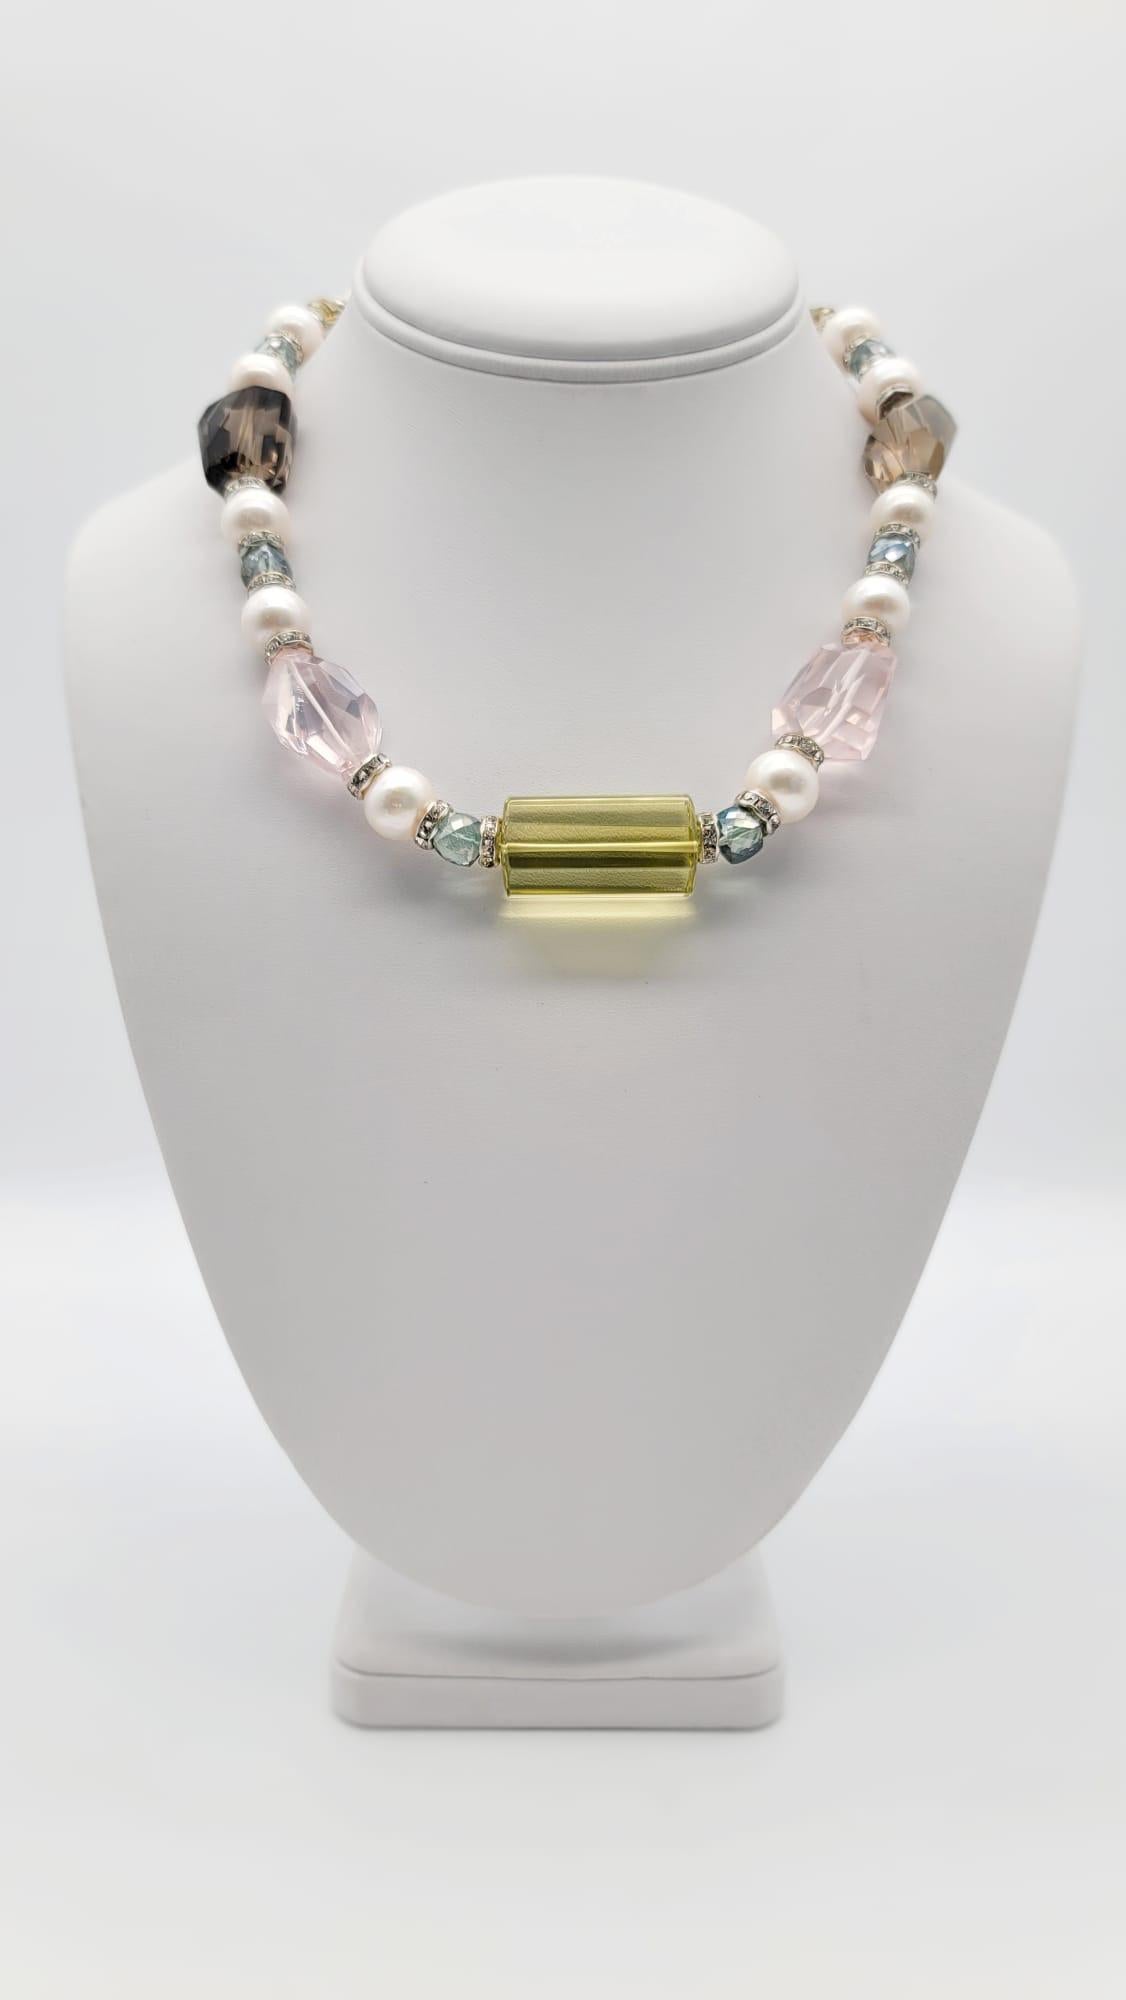 One-of-a-Kind

Elegant crystal quart in a soft and flattering palette of Citrine, Rose Quartz, Smokey Quartz, and Aquamarine all spaced between 10mm Pearls, CZ roundels.
The necklace is centered with an elongated barrel-cut citrine followed by rose